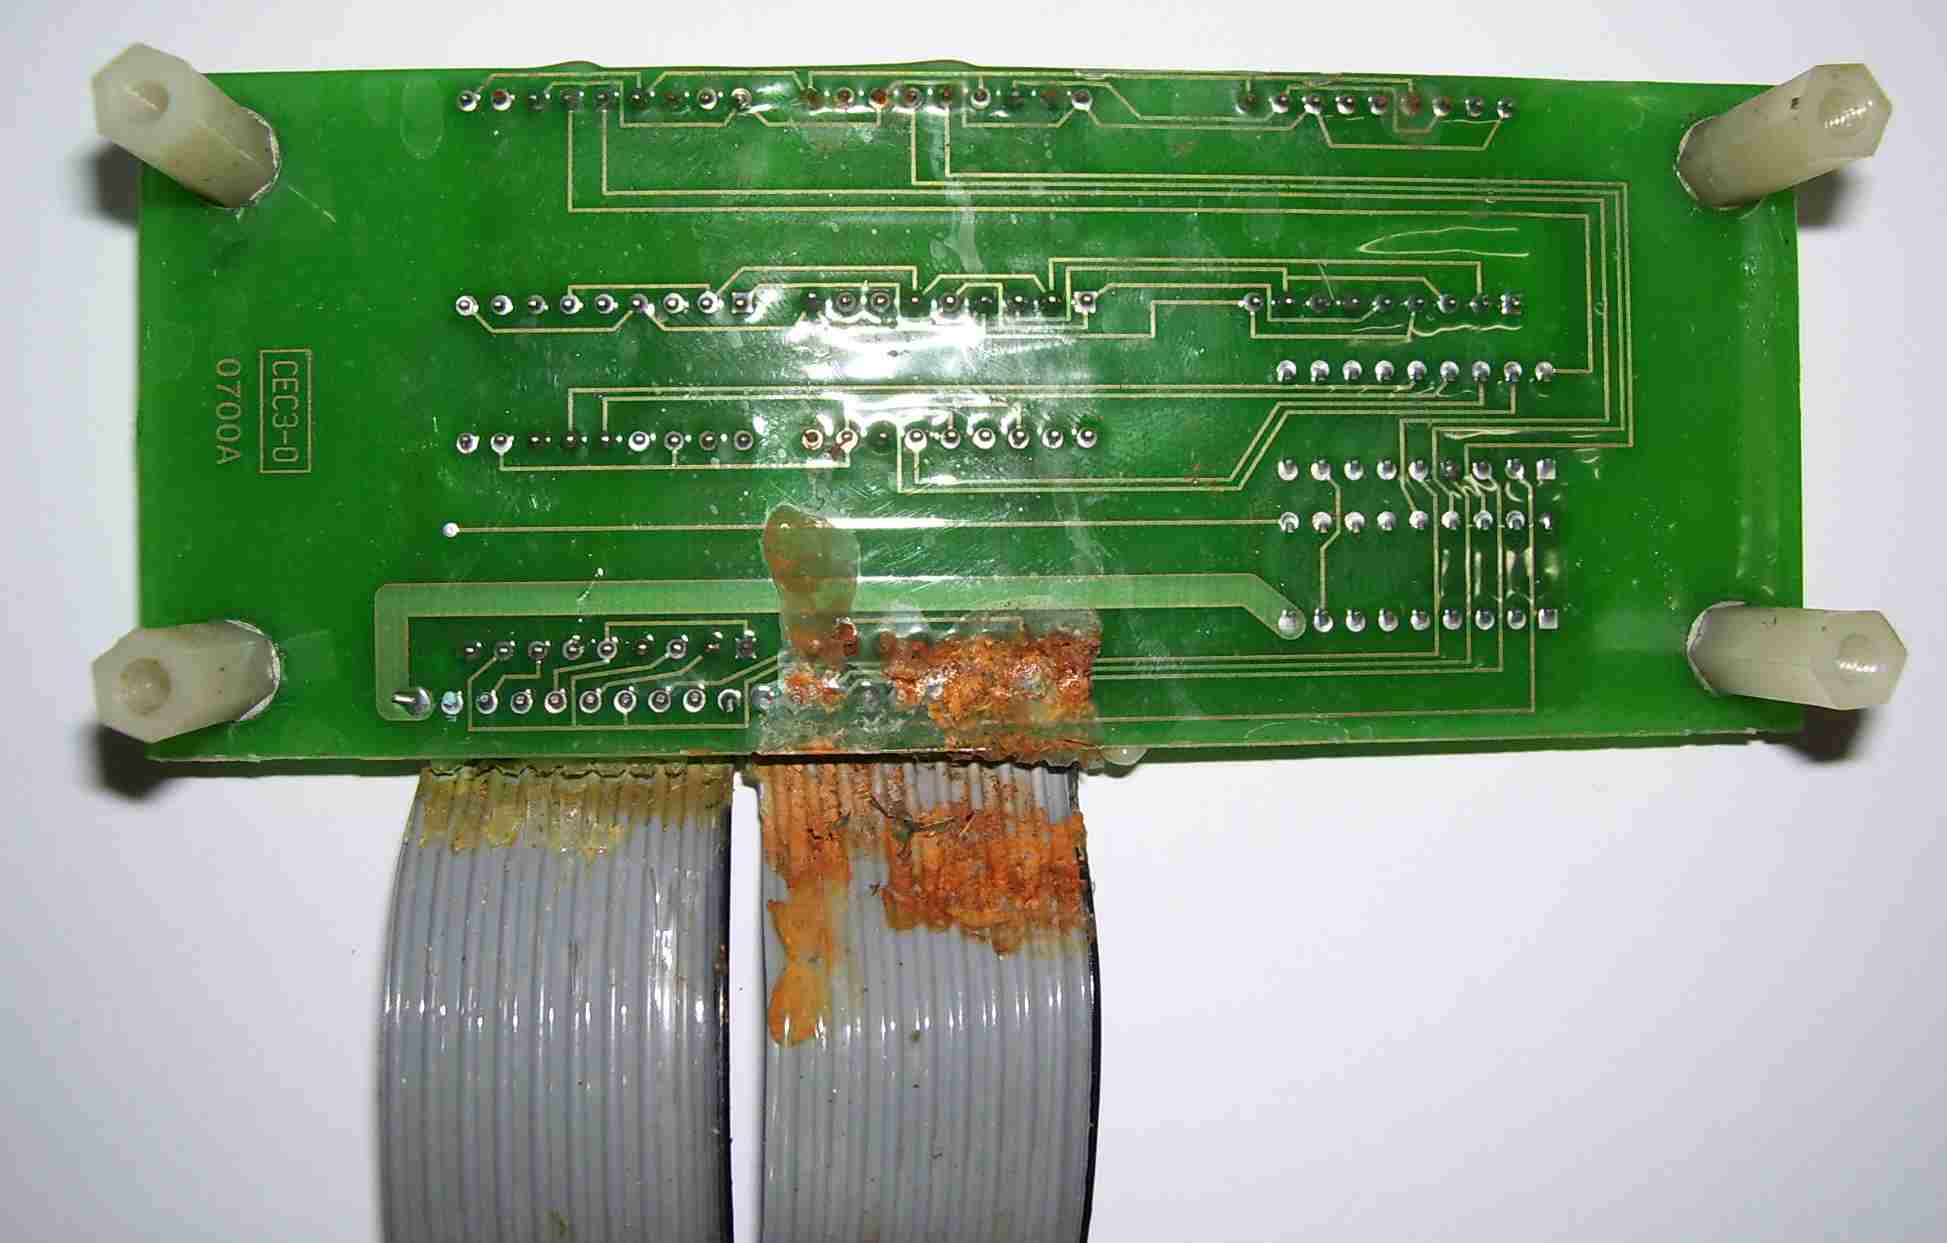 Circuit-board-with-moisture-damage